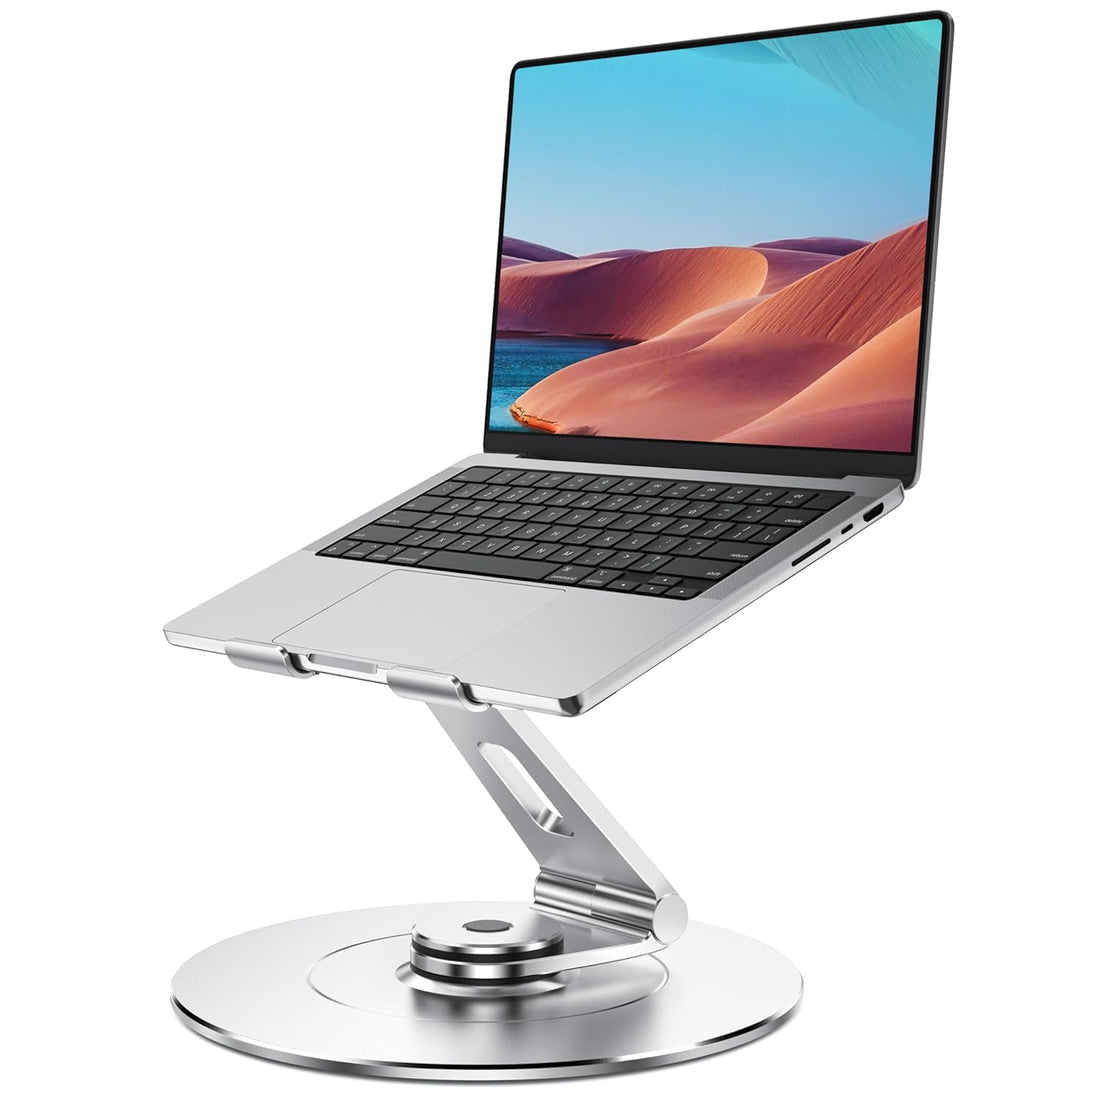 LOXP Ultra Stable Swivel Laptop Stand for Desk with 360 Rotating Base, Military-Grade Aluminum, Height Adjustable Laptop Riser, Portable Computer Stand Fits MacBook, HP, Dell, All Laptops 10"-17.3"